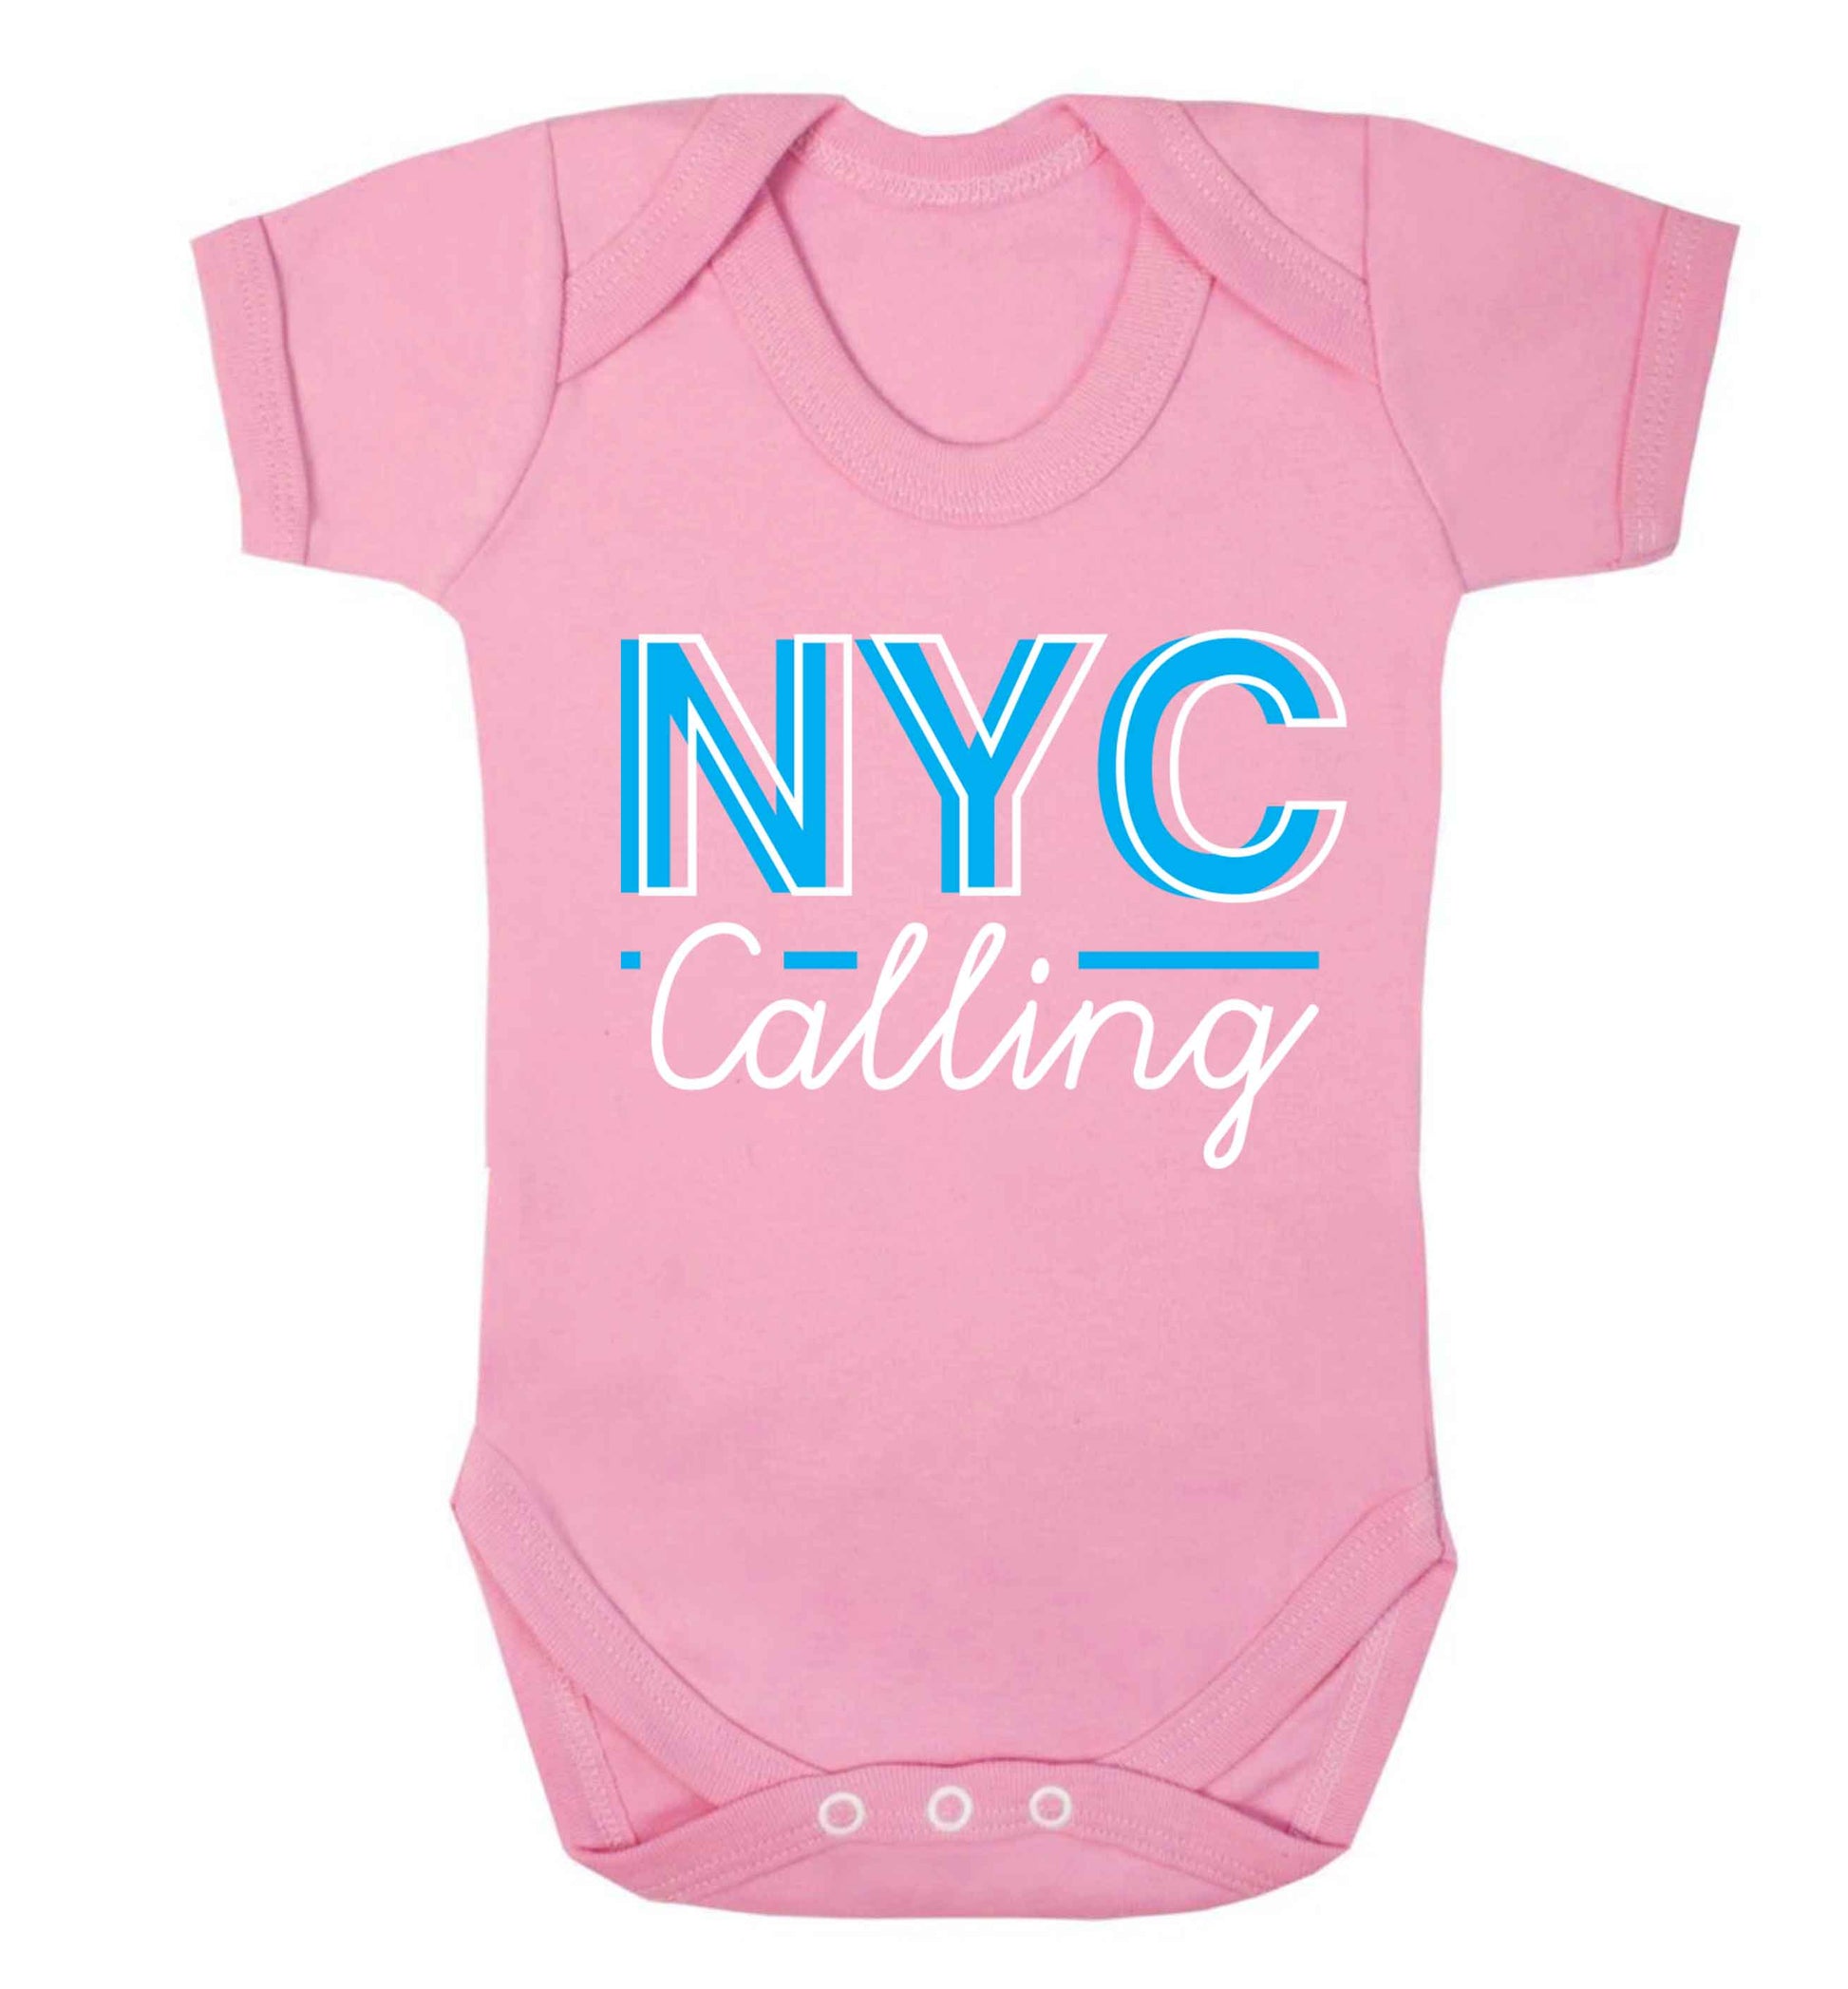 NYC calling Baby Vest pale pink 18-24 months